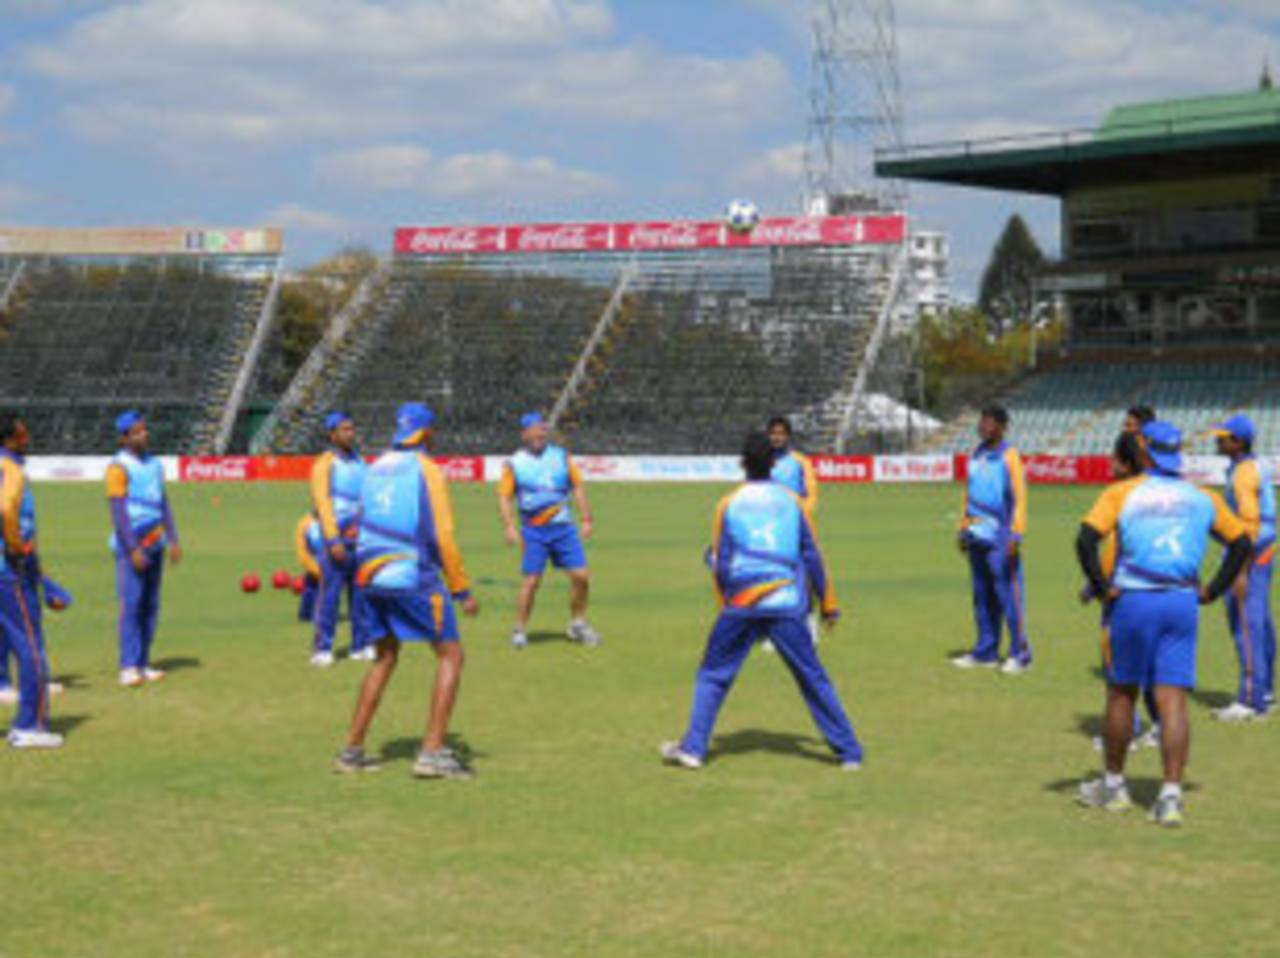 The outfield in Harare is pristine green and it is made of <i>kikuyu</i> grass, resilient enough for the Bangladesh team to play football on&nbsp;&nbsp;&bull;&nbsp;&nbsp;ESPNcricinfo Ltd